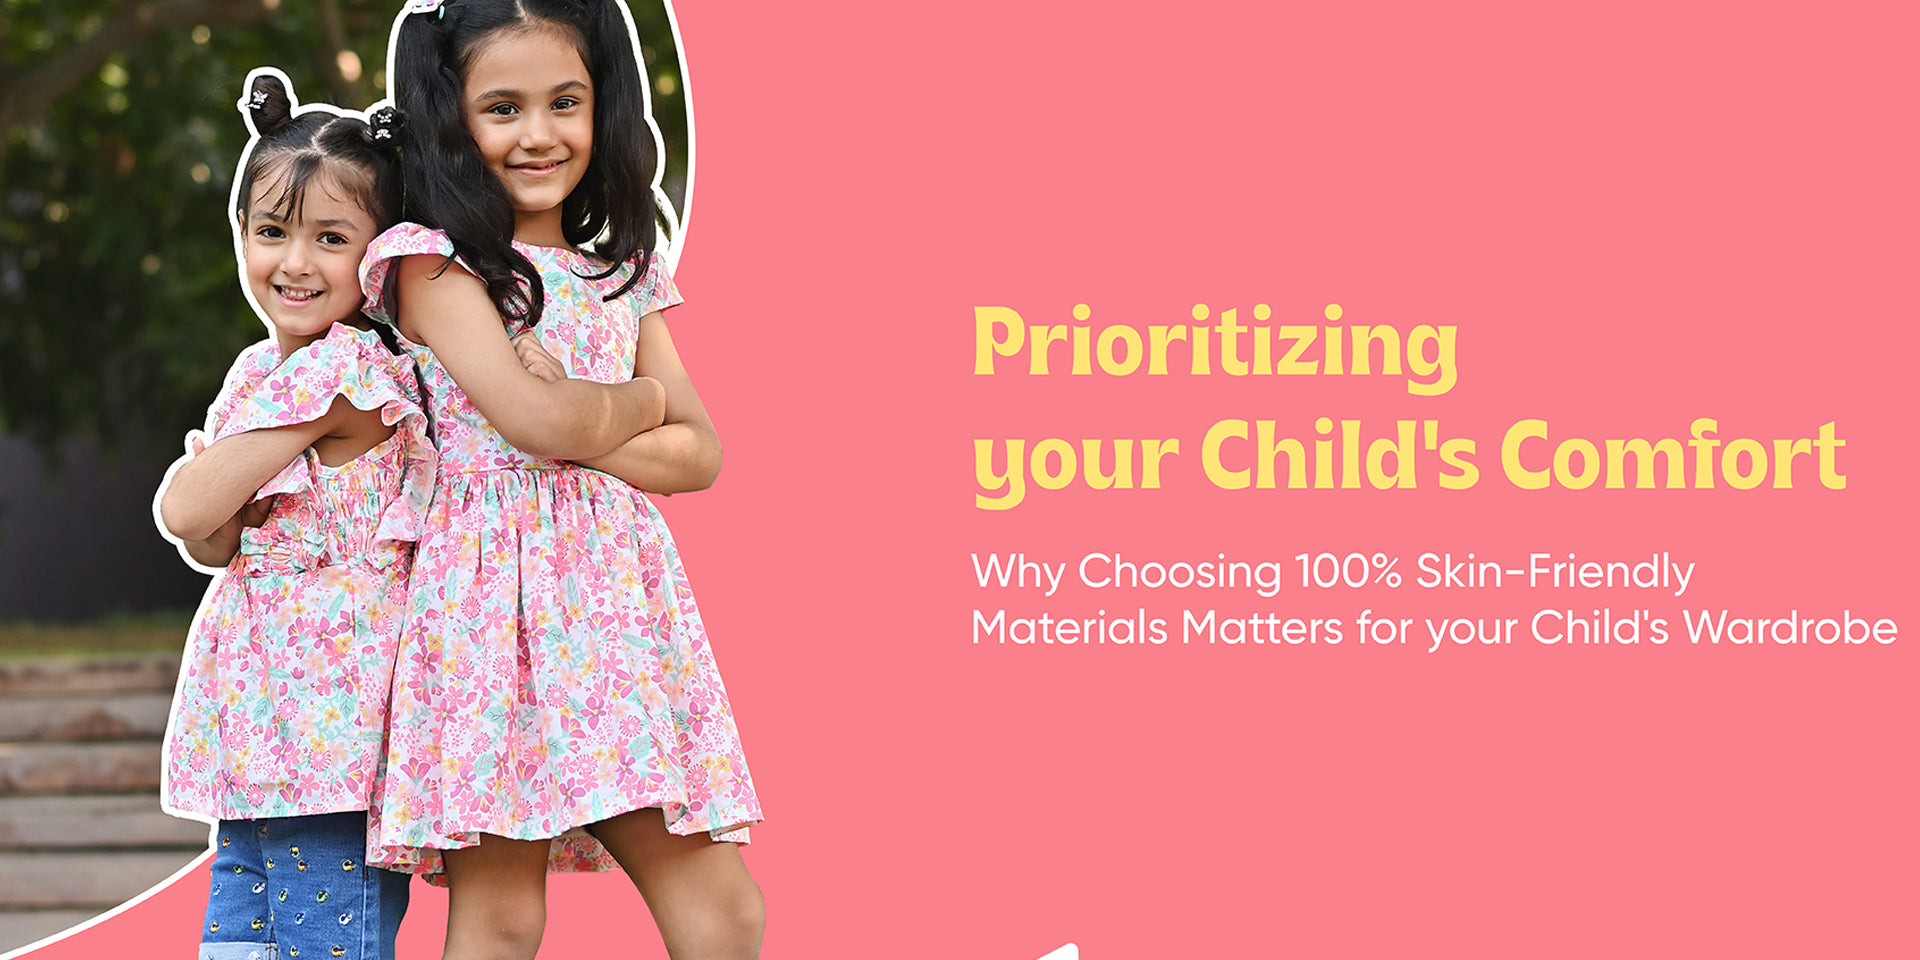 Prioritizing Your Child's Comfort: Why Choosing 100% Skin-Friendly Materials Matters for Your Child's Wardrobe